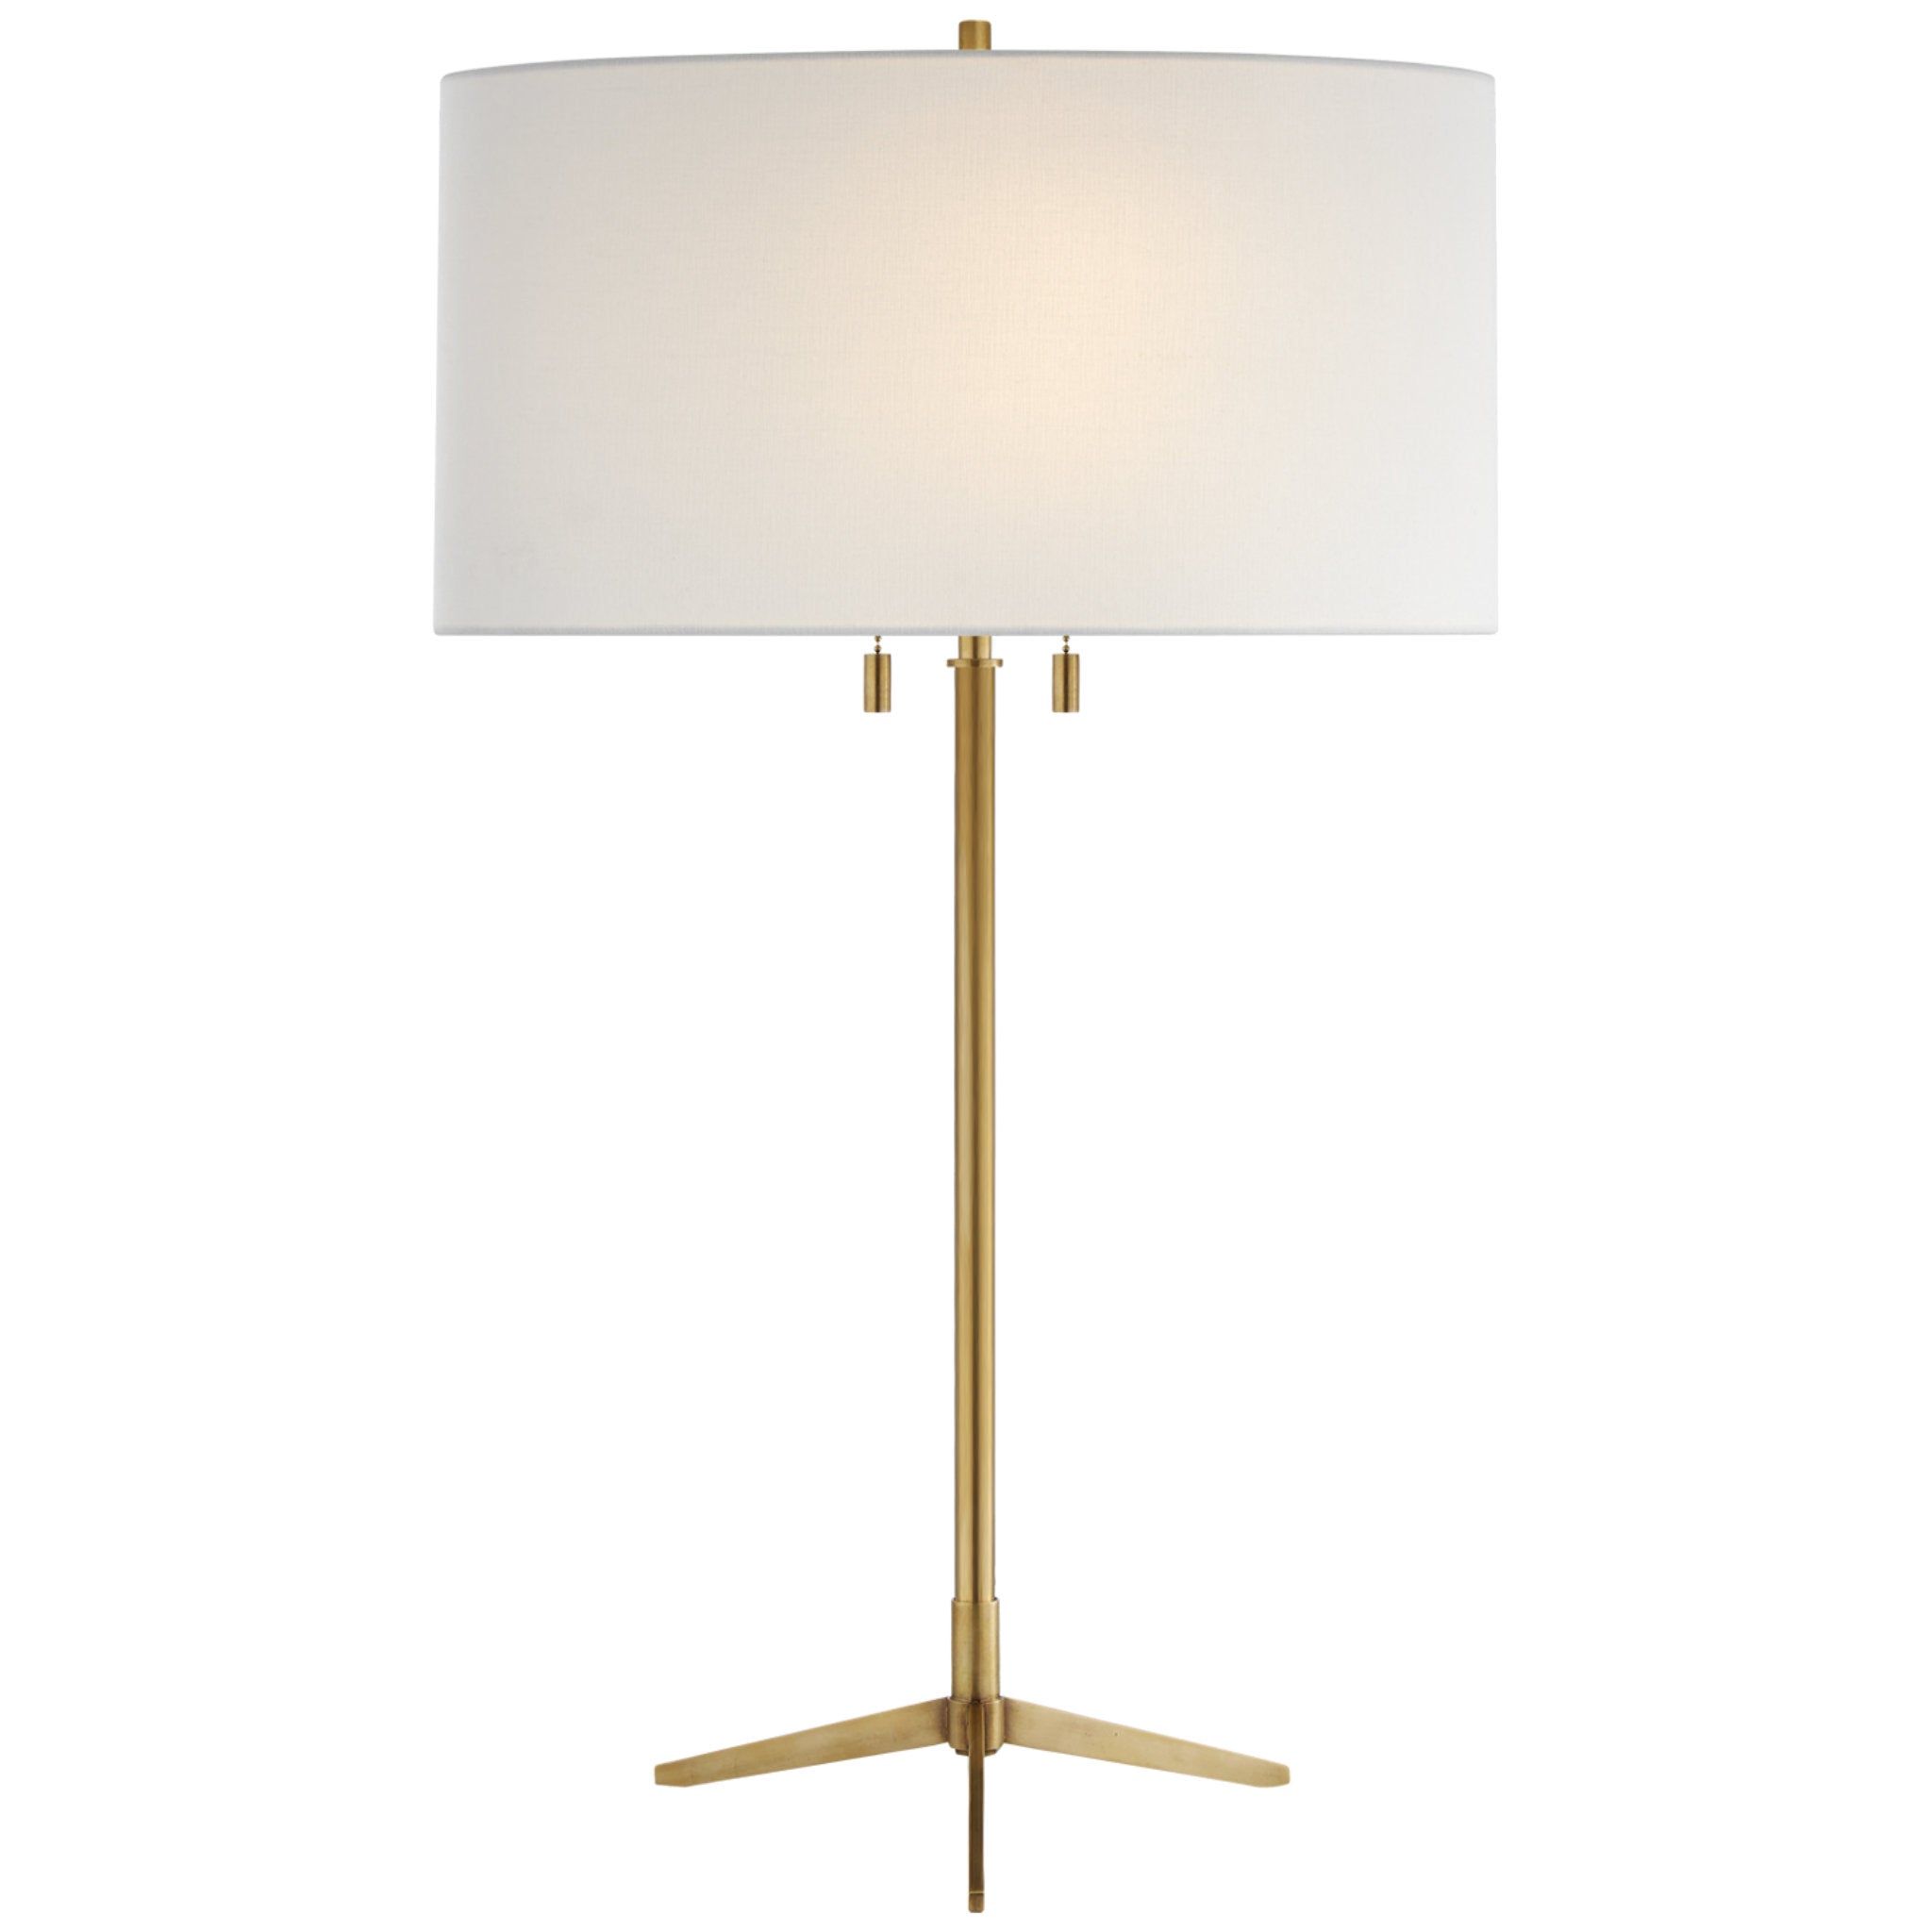 Thomas O'Brien Caron Table Lamp in Hand-Rubbed Antique Brass with Linen Shade